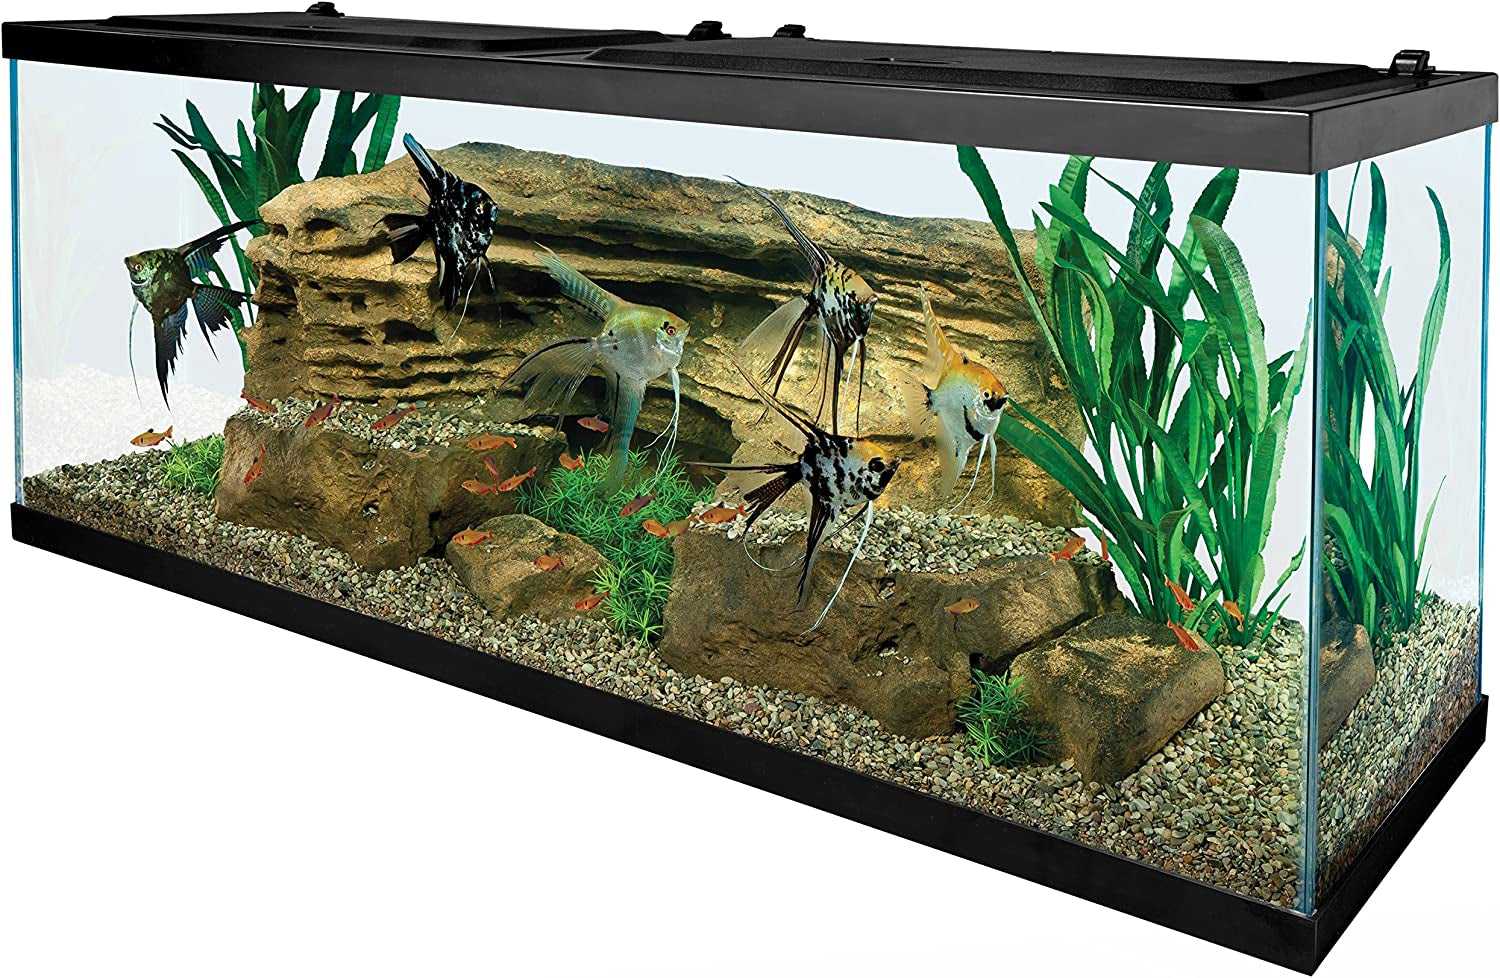 55 Gallon Aquarium Kit with Fish Tank, Fish Net, Fish Food, Filter, Heater and Water Conditioners